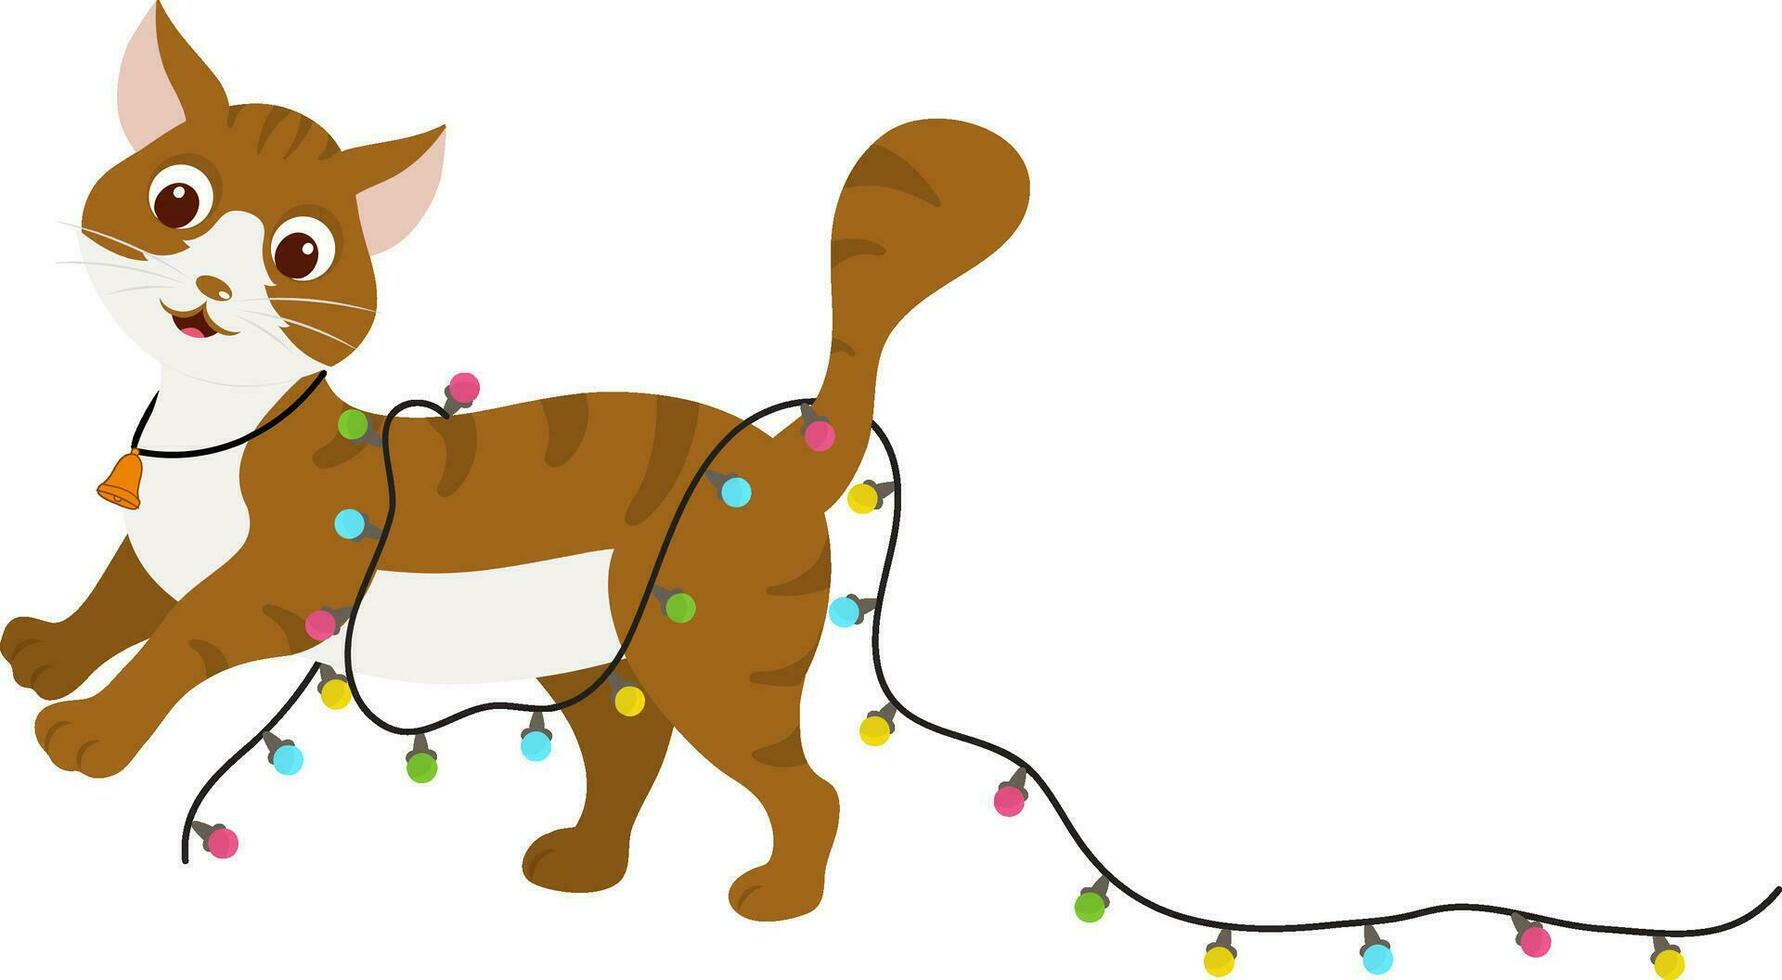 Running Cat Tangled Strings Light Icon In Flat Style. vector